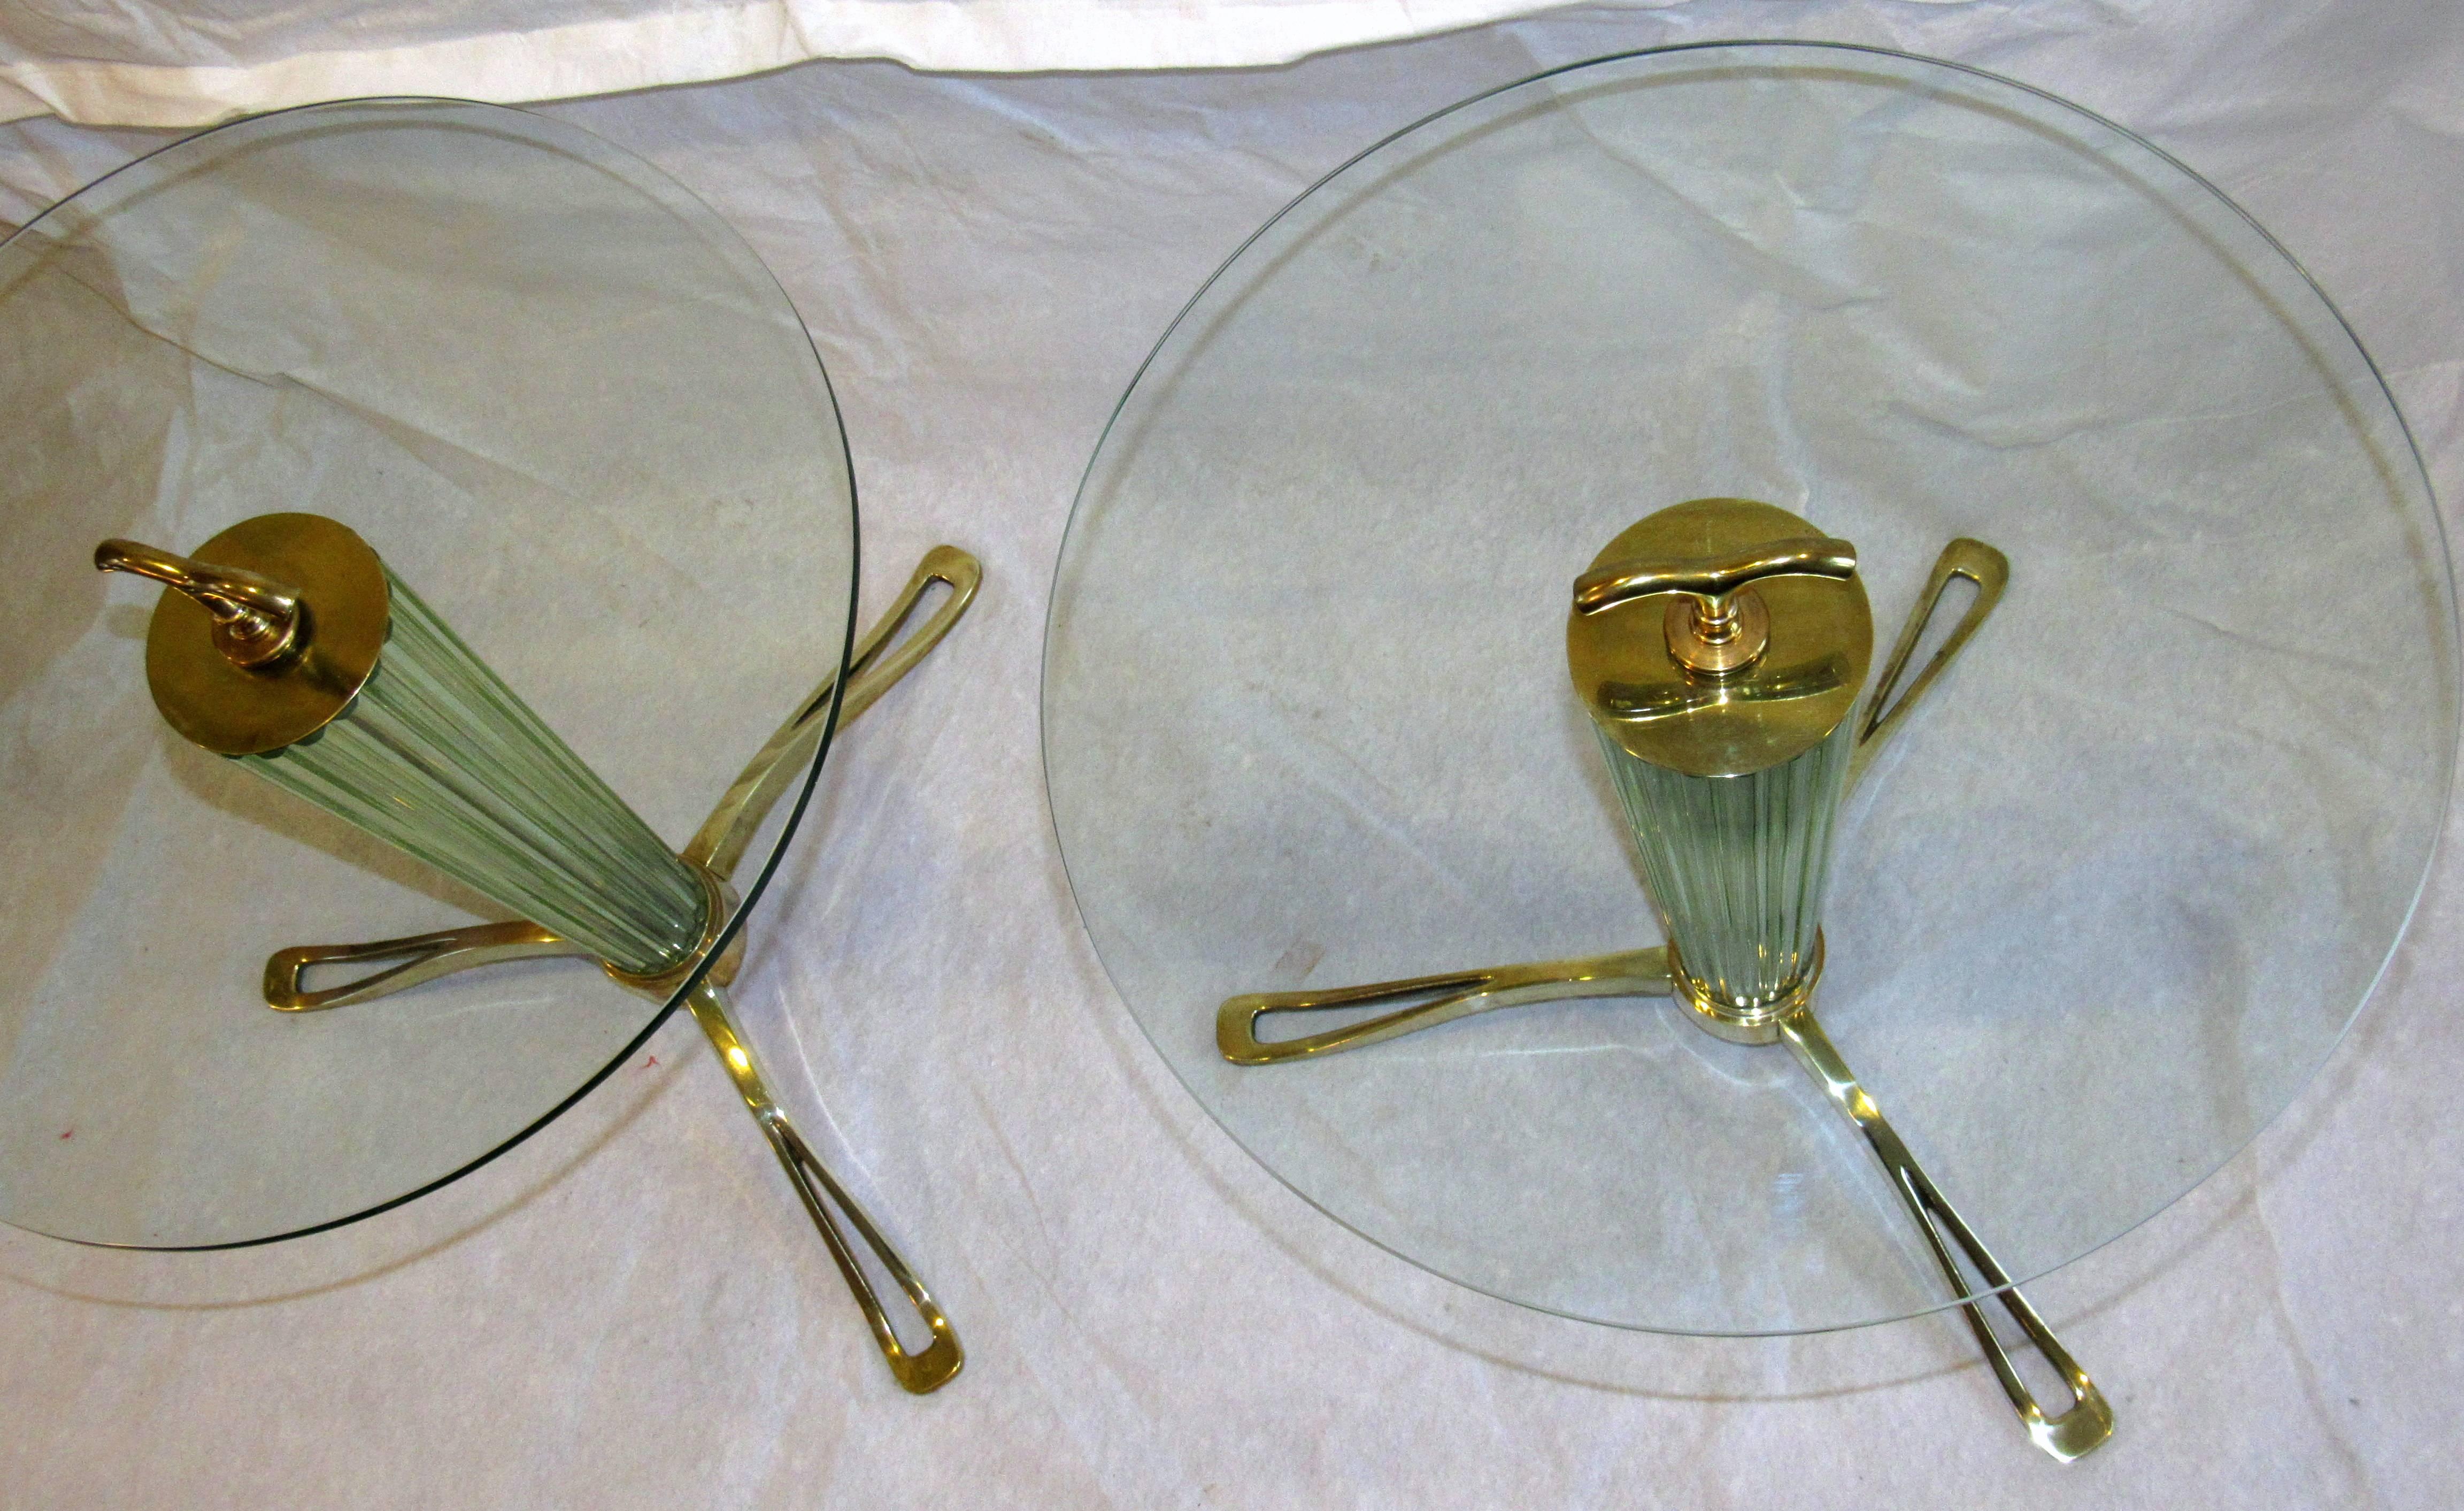 A rare pair of fluted Murano glass end tables / gueridons in the style of Fontana Arte circa 1958.
The heavy fluted hollow glass cones are held on beautifully cast polished brass tripod bases 
The tables are in excellent vintage condition with one